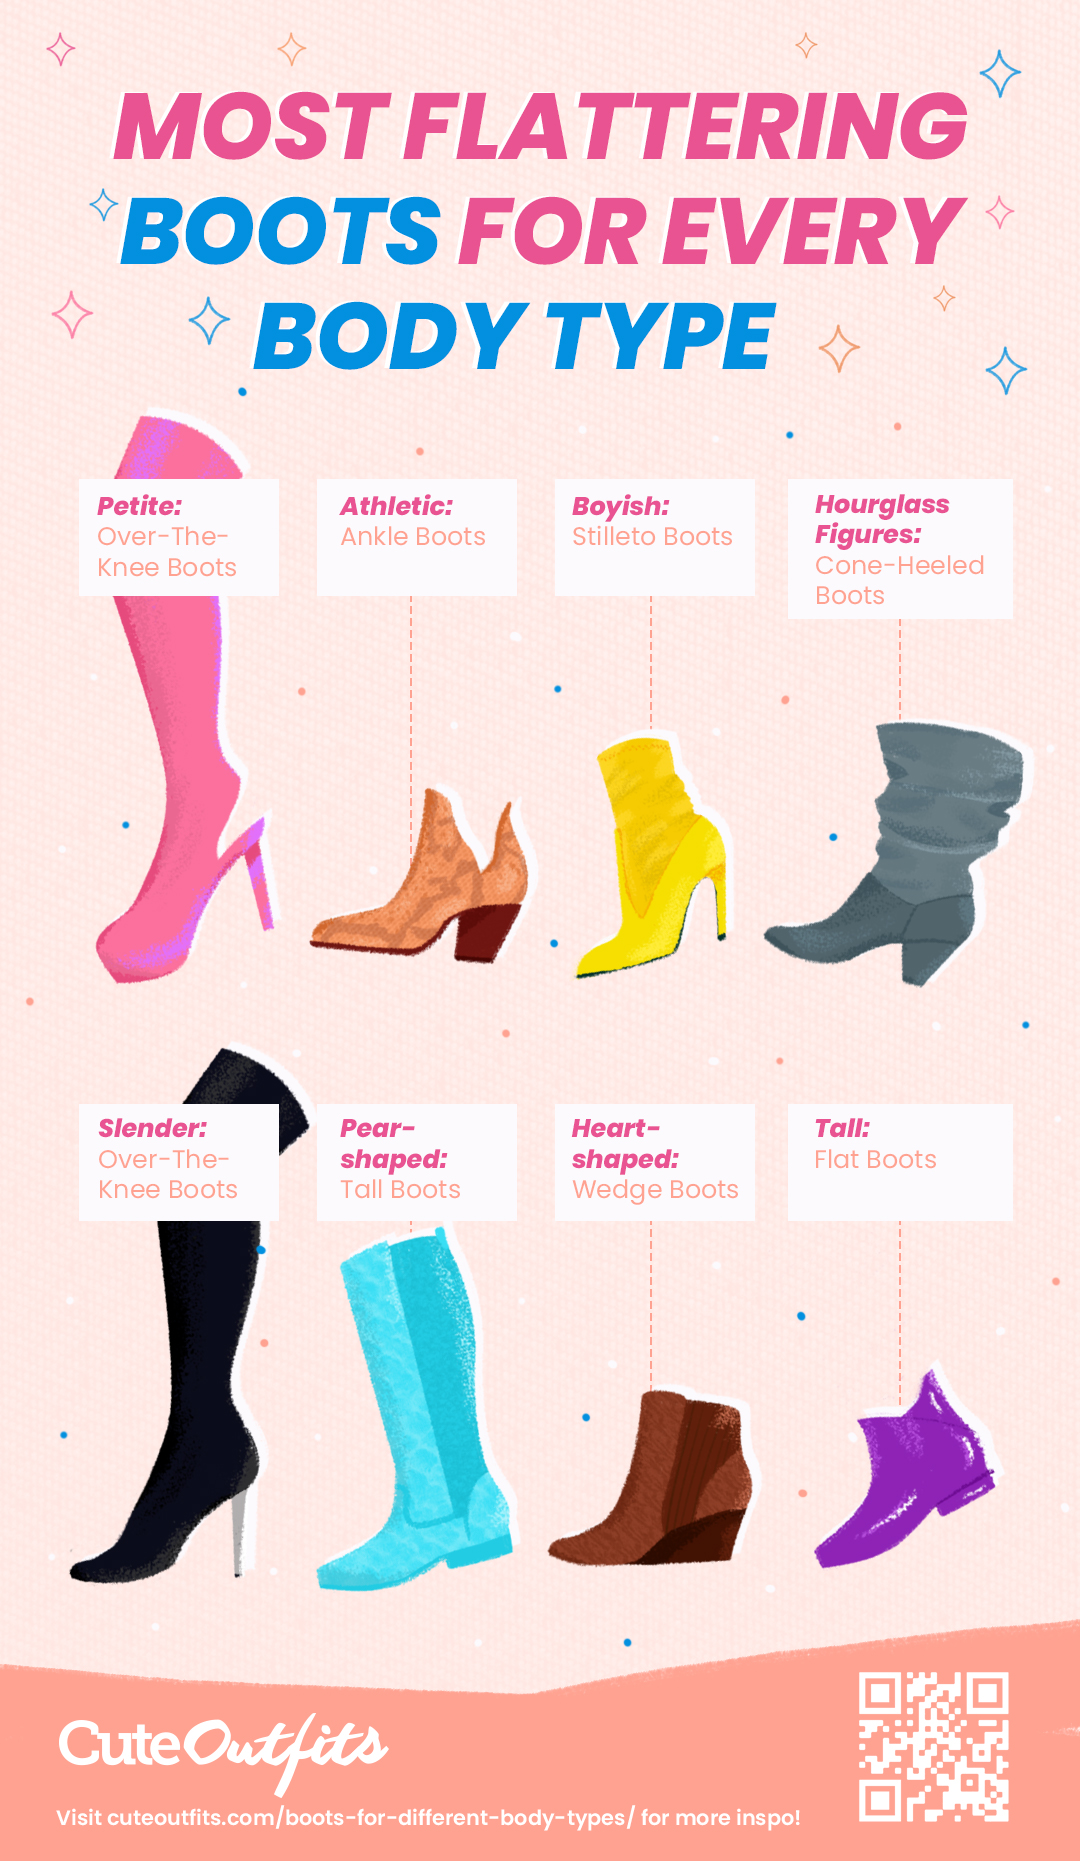 8 Types Of Boots For Women Of Different Body Types [INFOGRAPHIC]